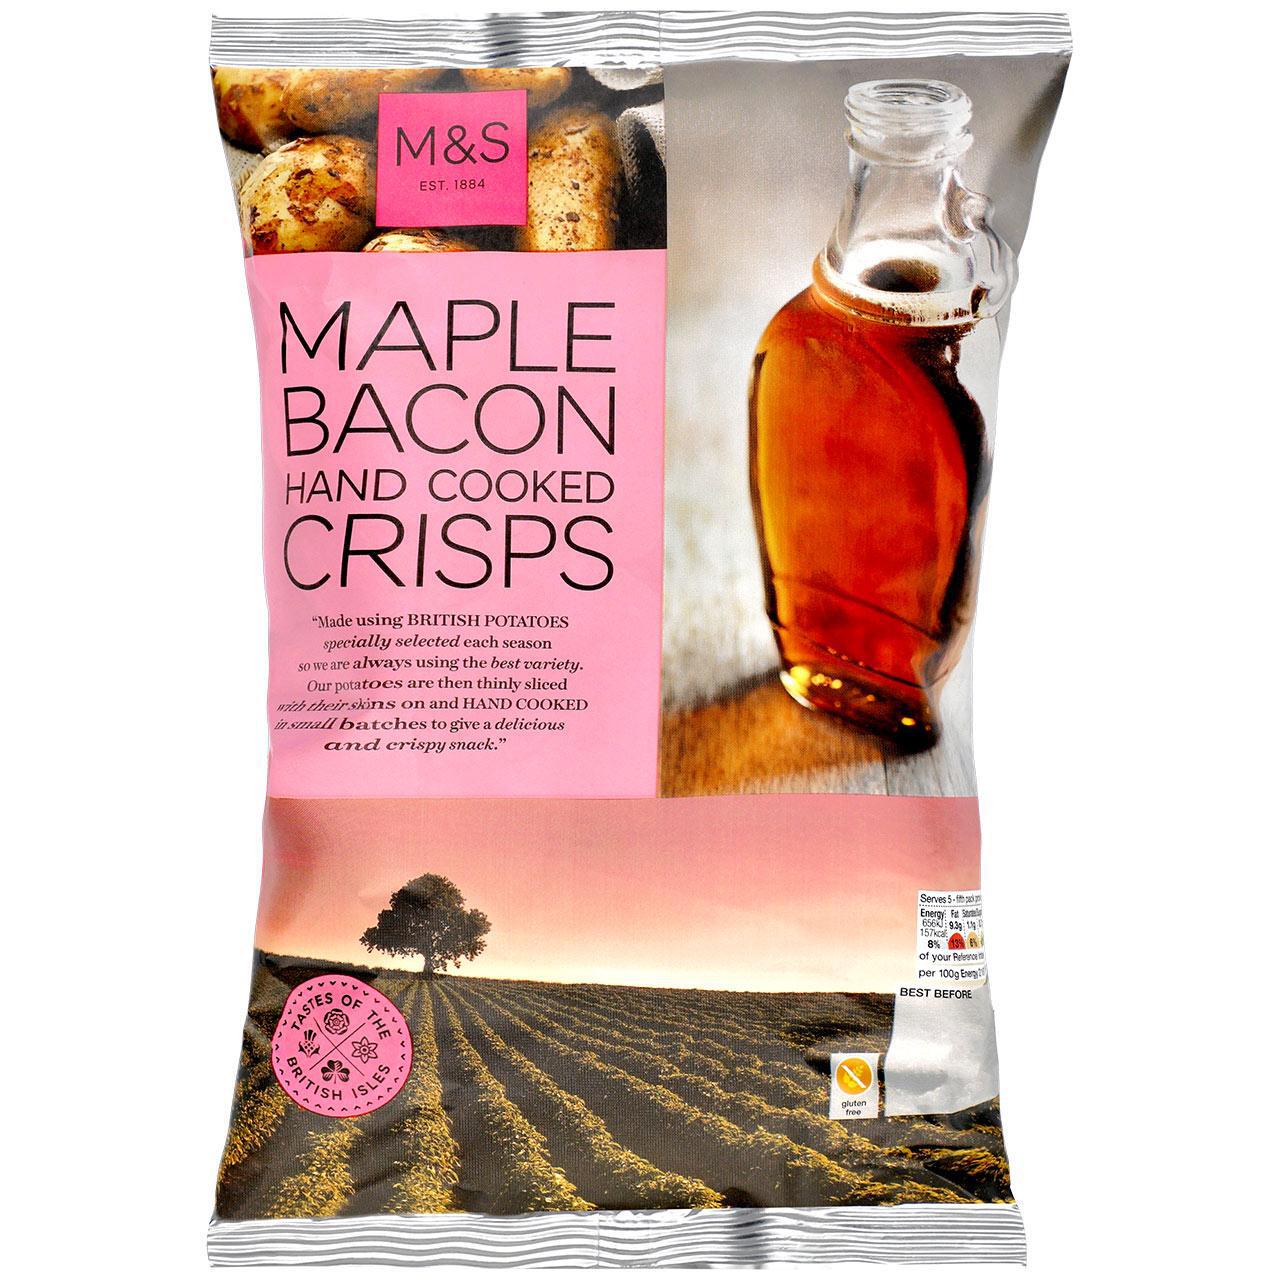 M&S Maple Bacon Hand Cooked Crisps 150g